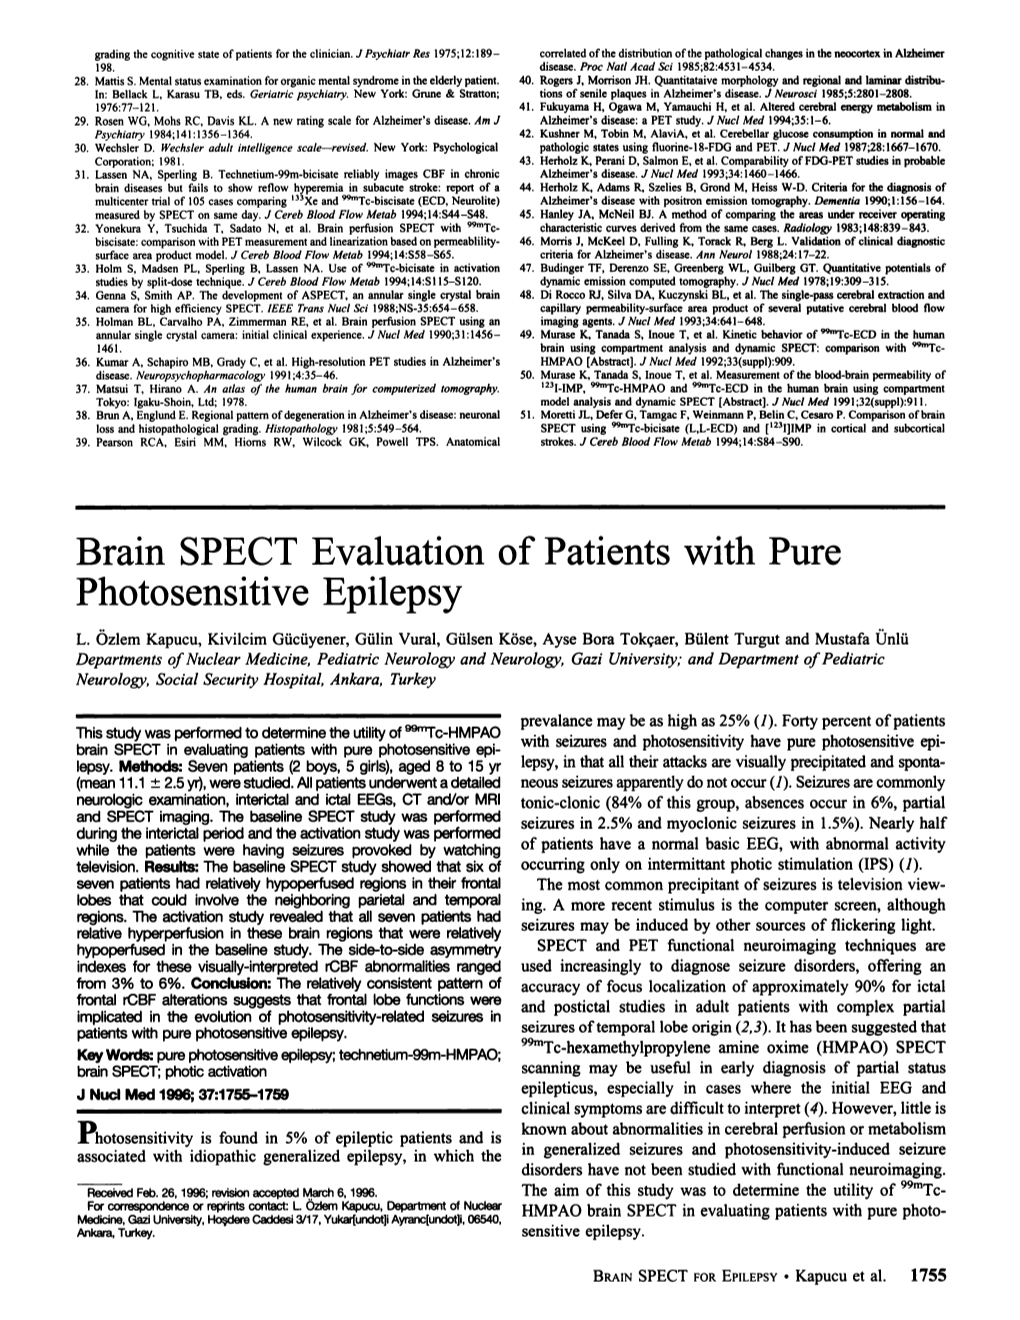 Brain SPECT Evaluation of Patients with Pure Photosensitive Epilepsy